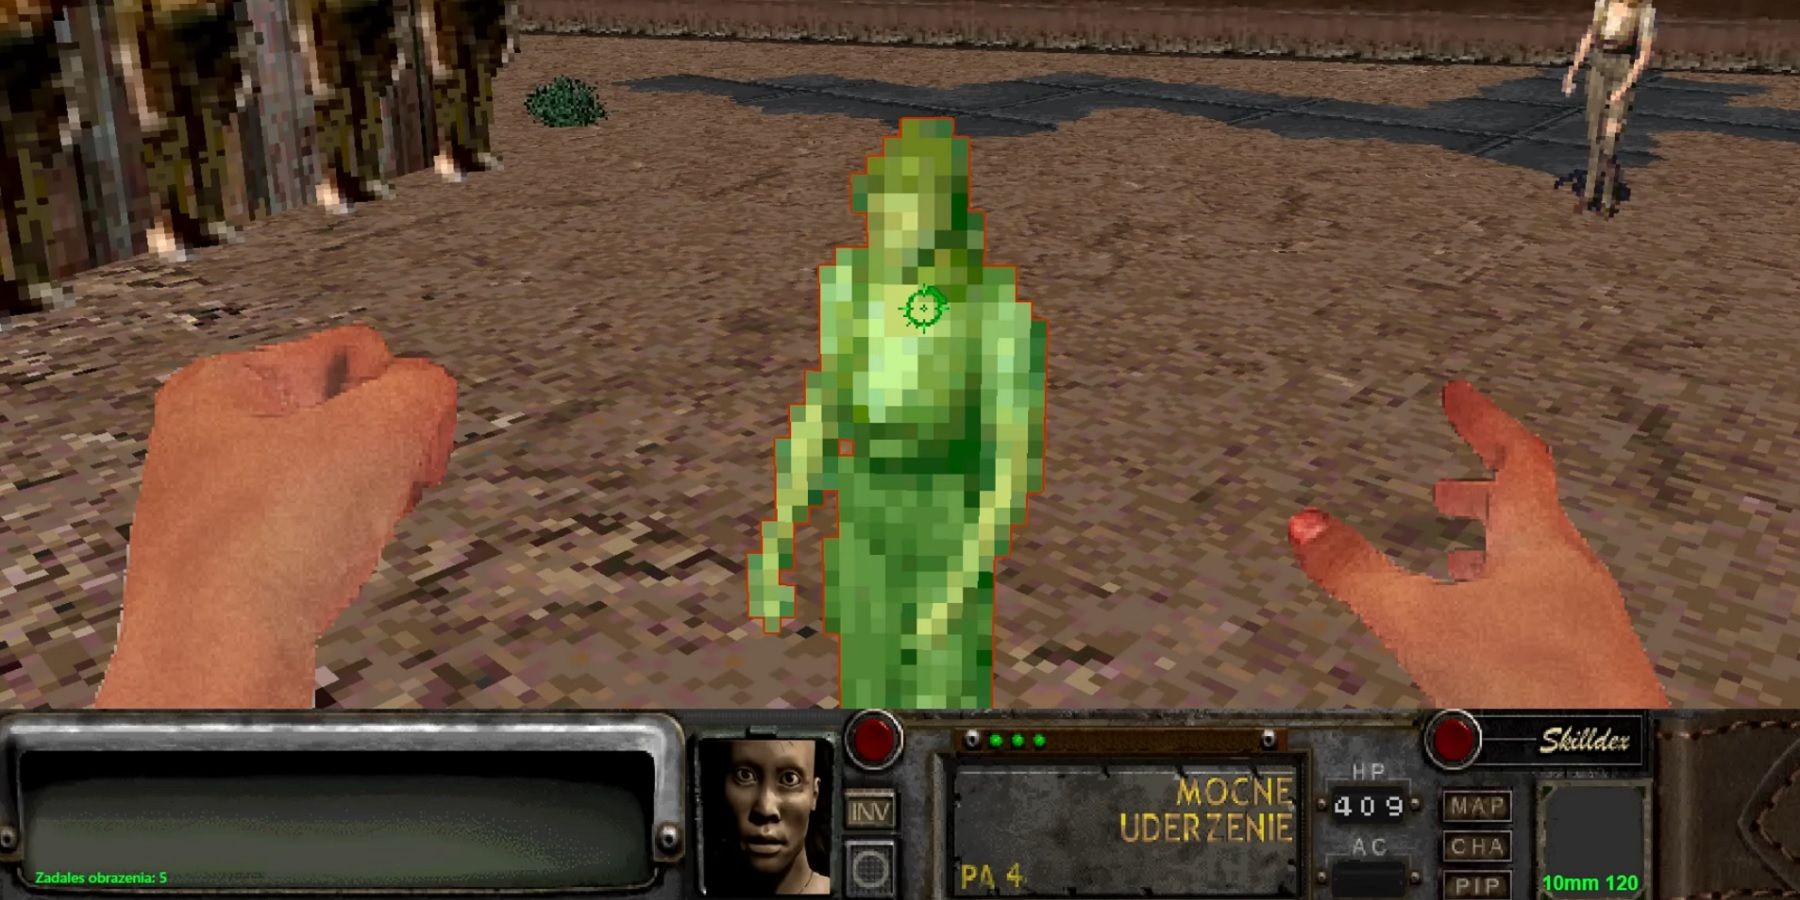 Fallout 2 remade as an FPS game, which you can play right now for free